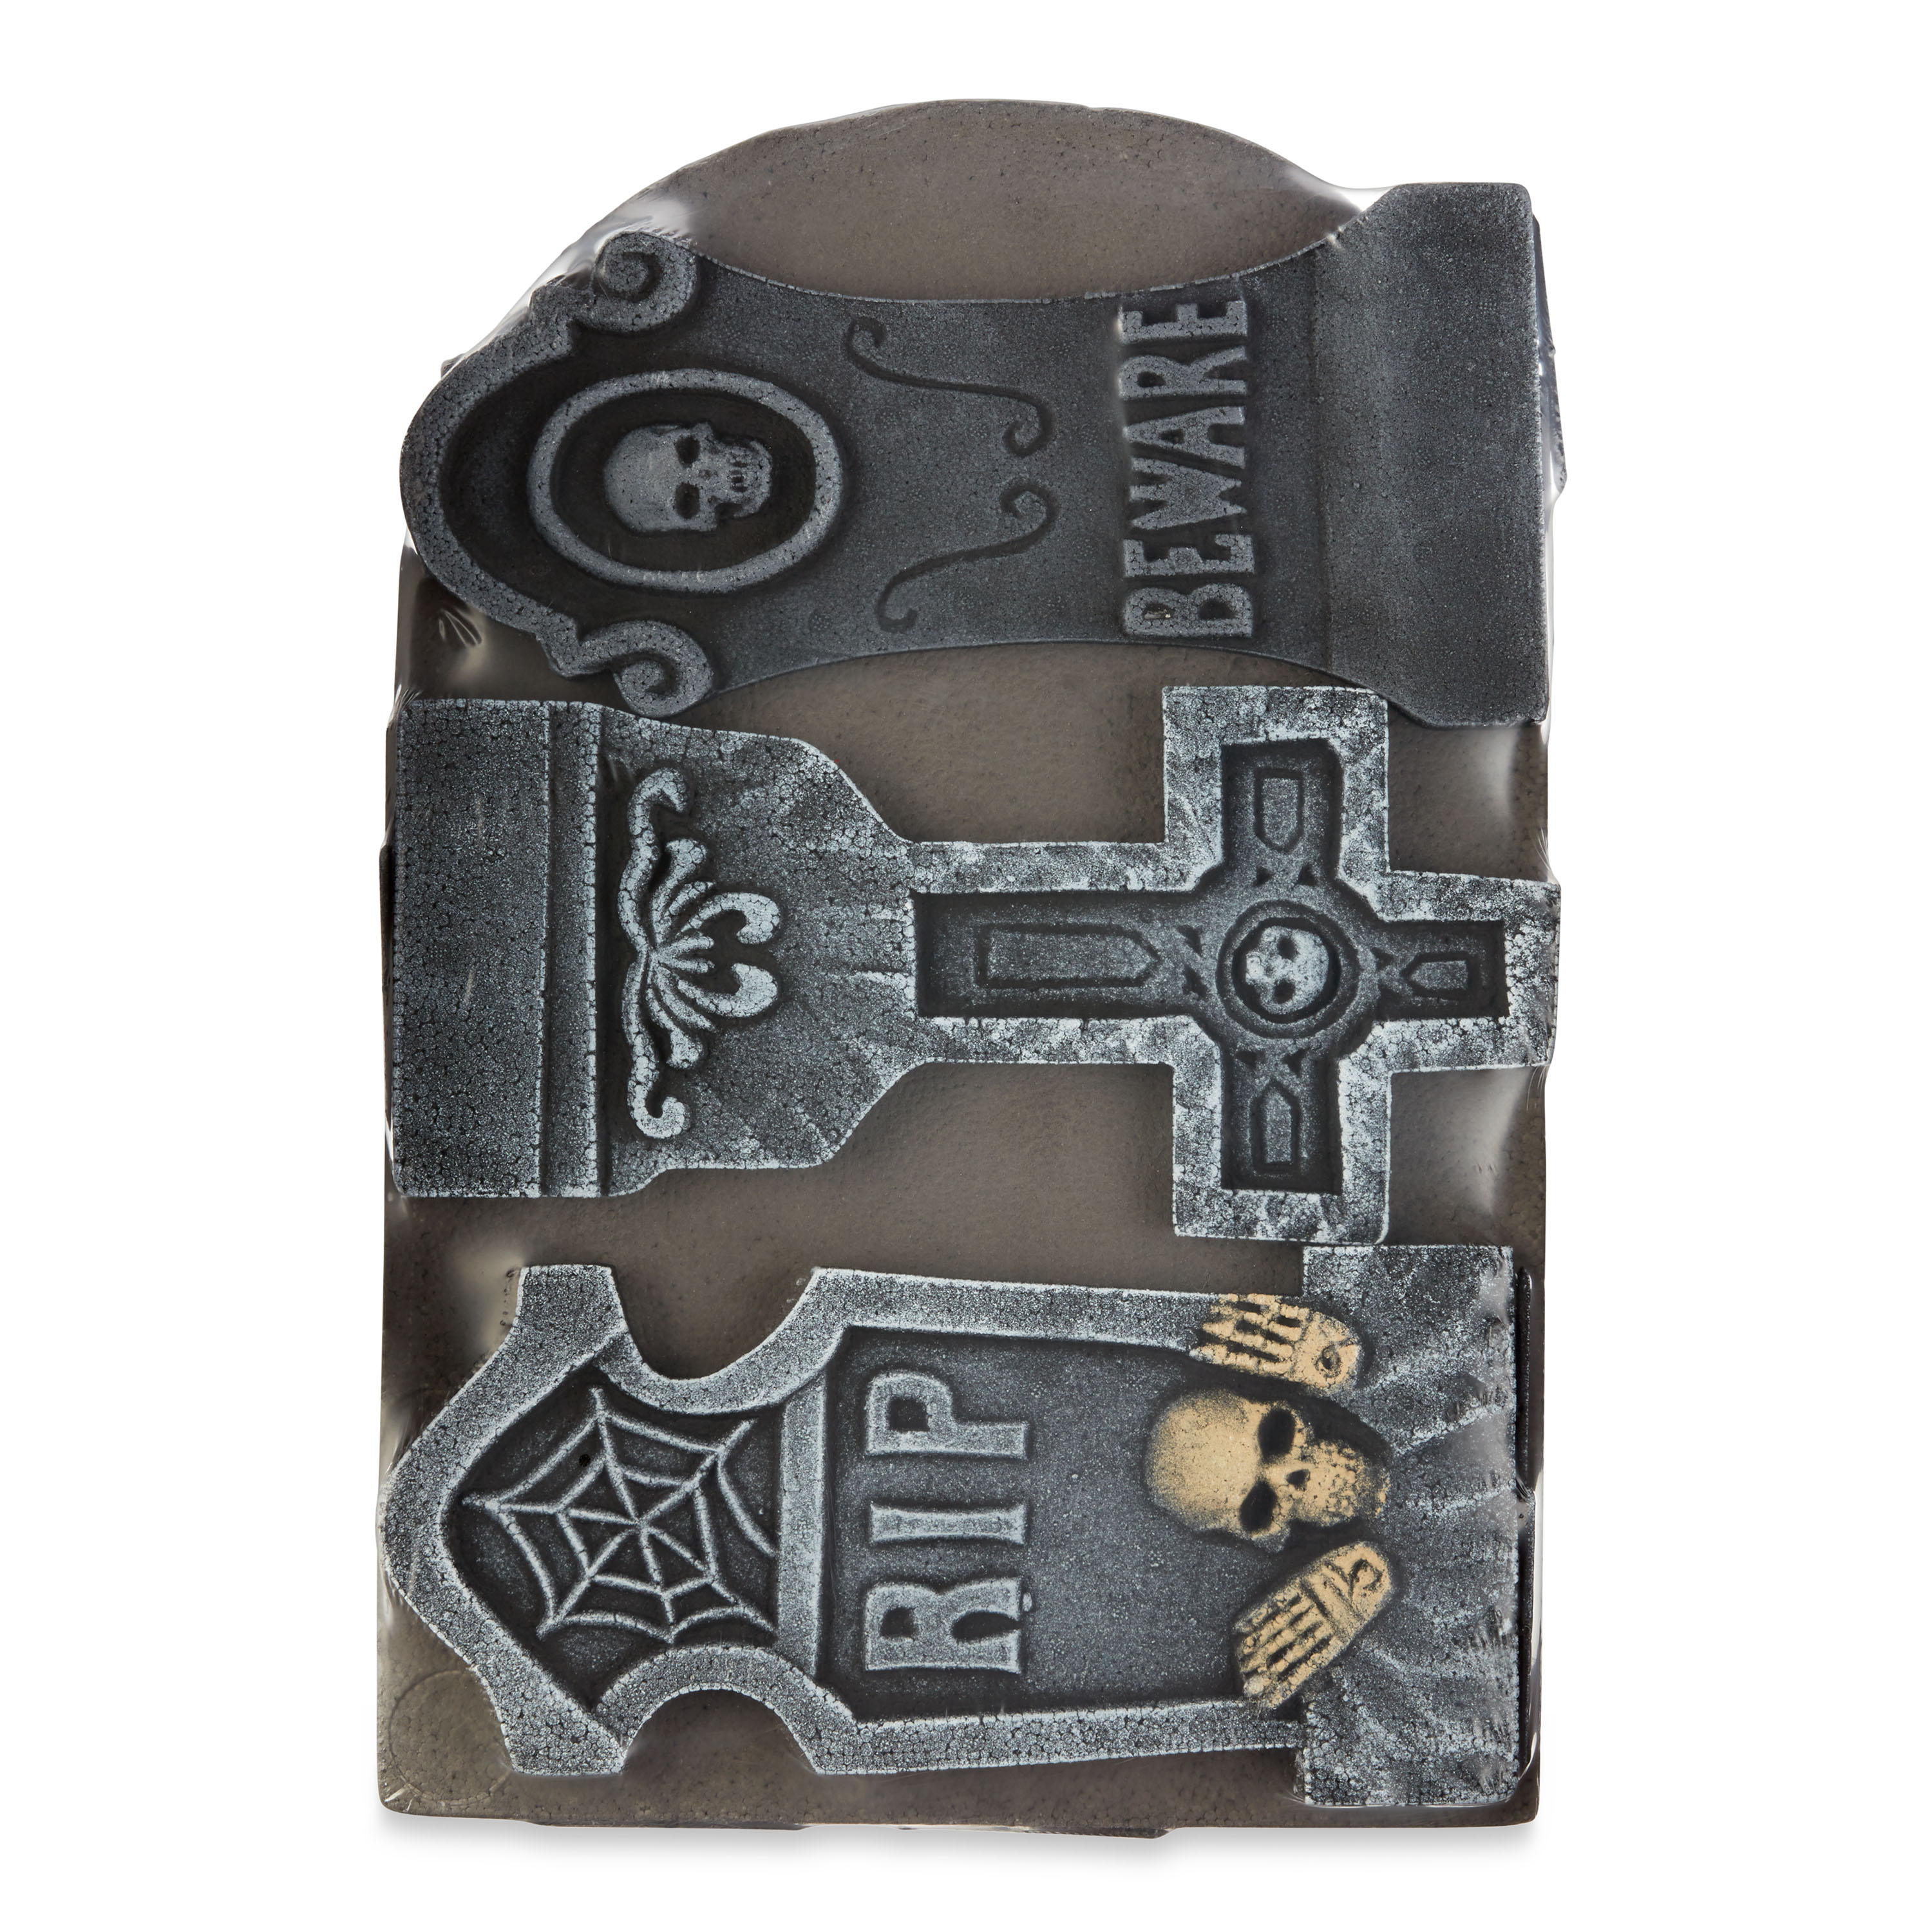 Way to Celebrate Halloween 6-Piece Tombstone Decoration Set, Gray - image 3 of 4